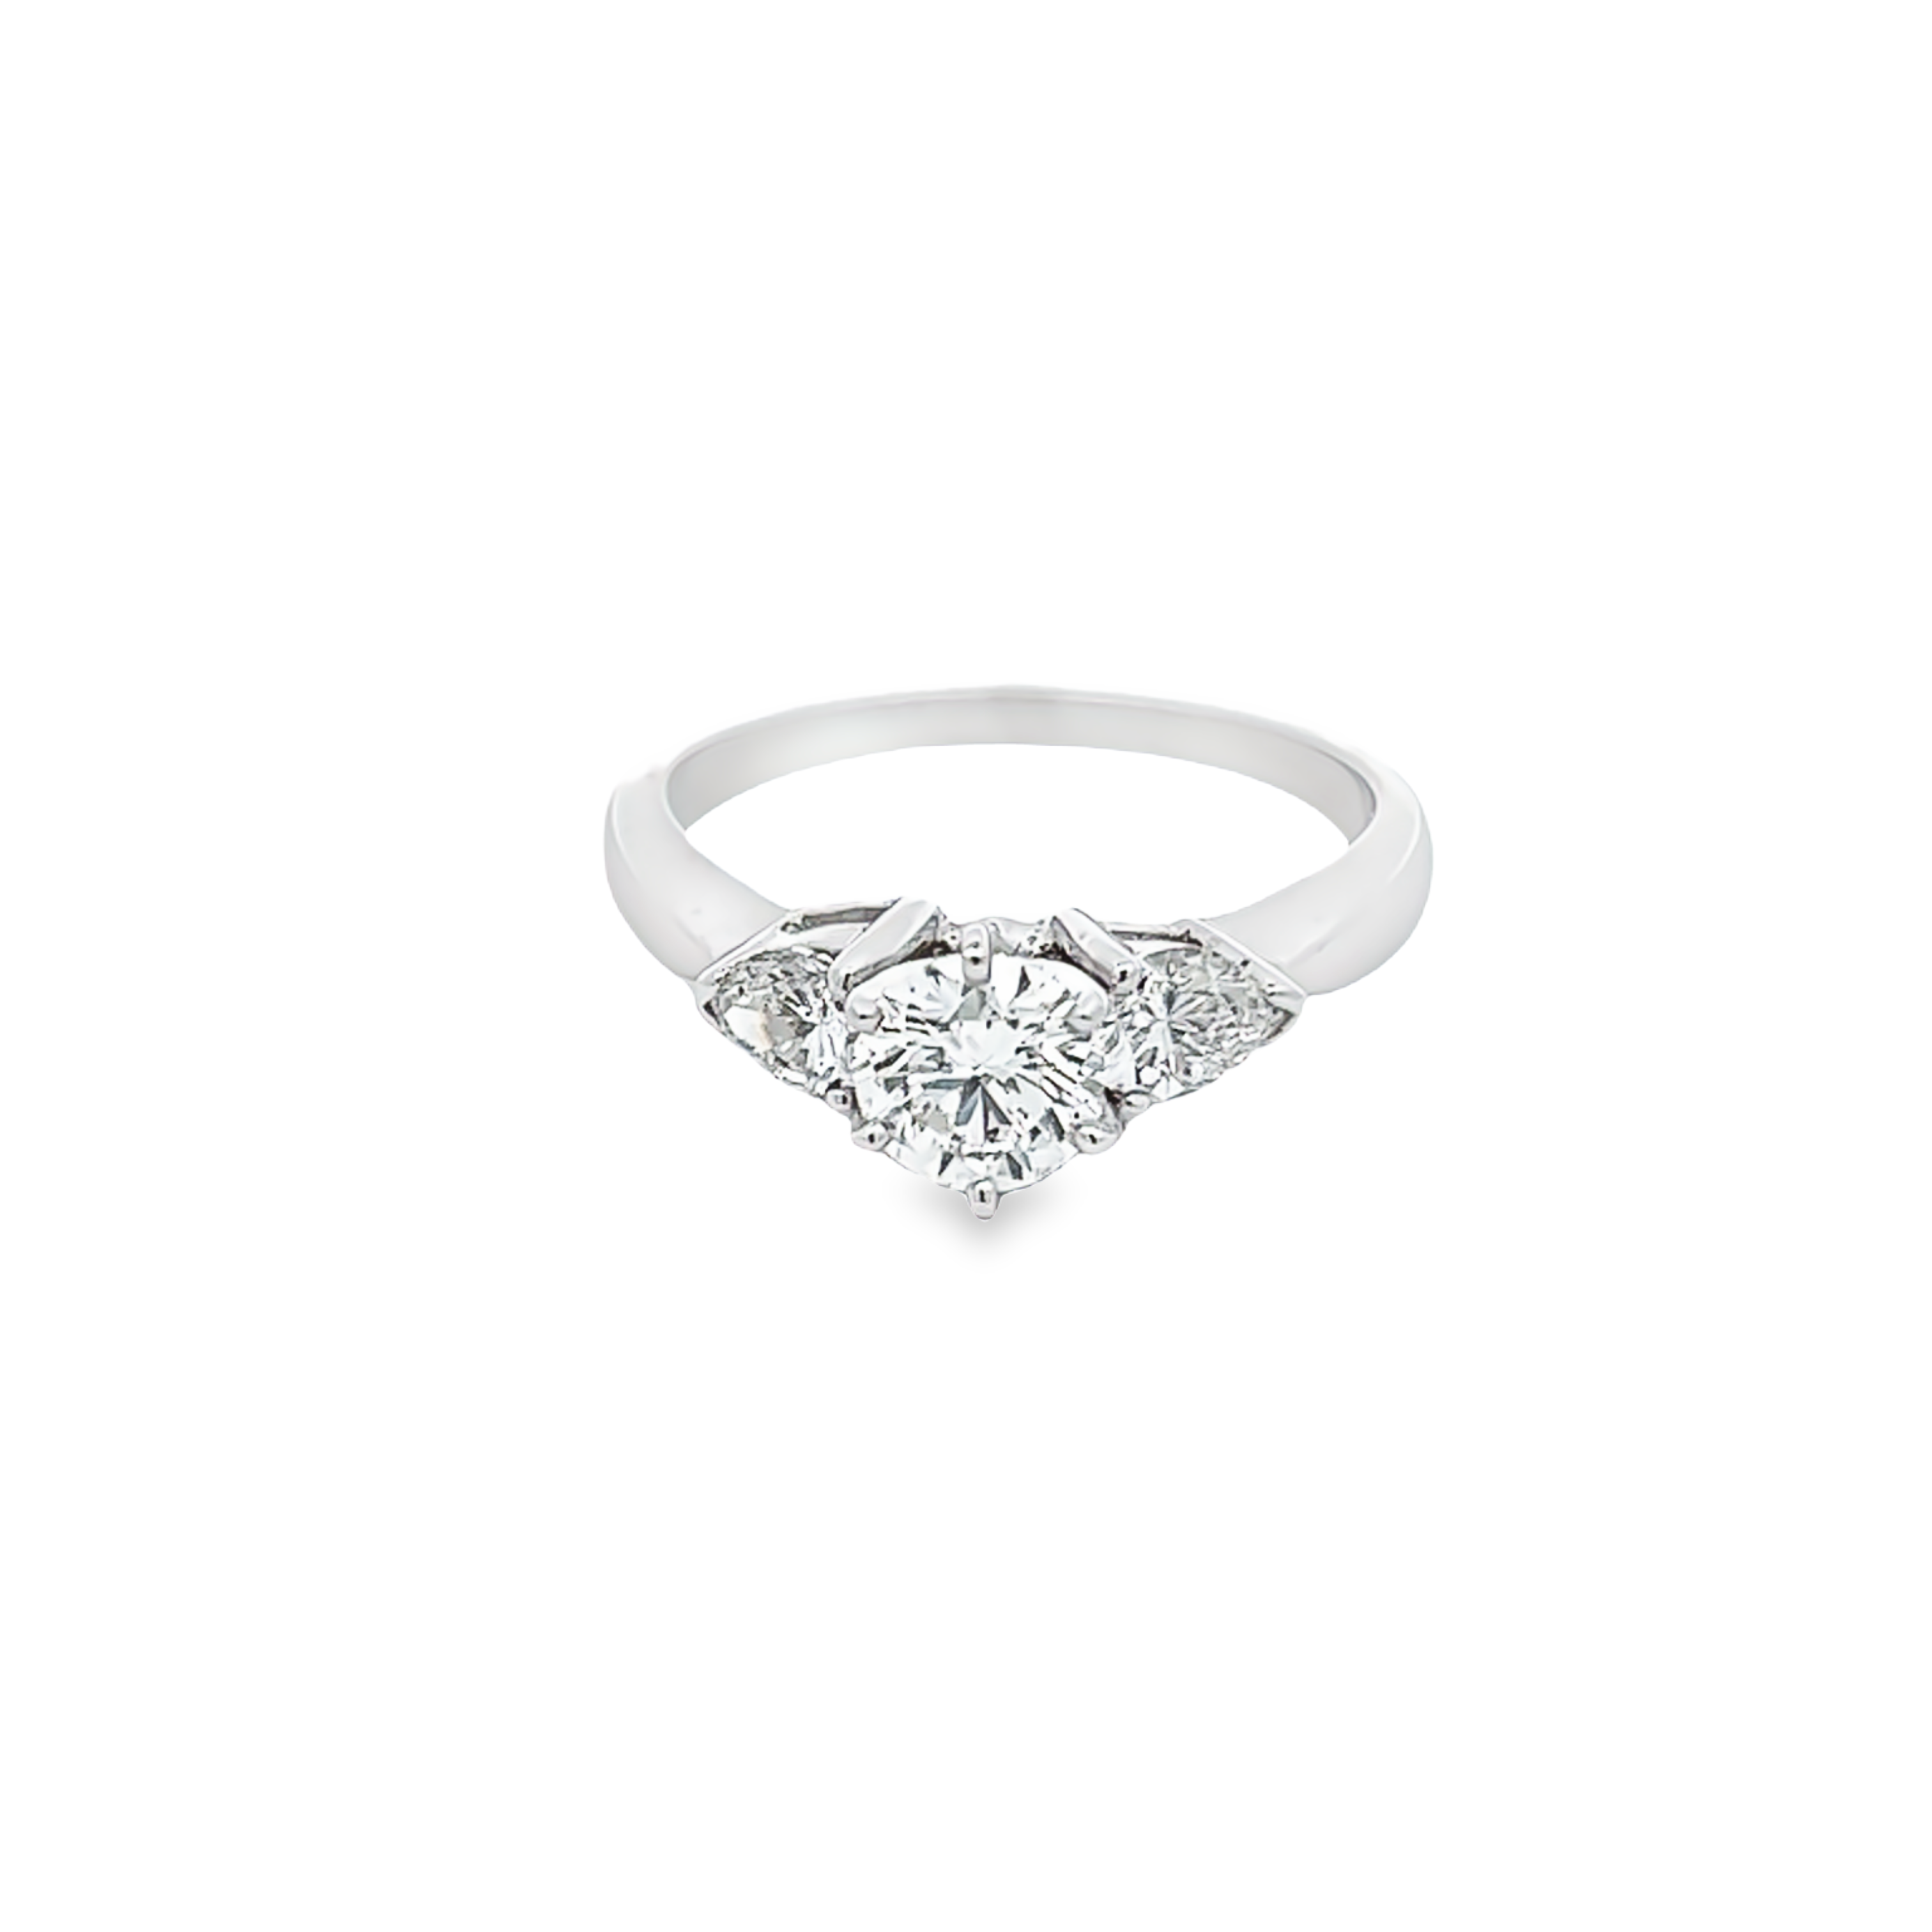 14 Karat white gold Ring with  one 0.66ct ROUND BRILLIANT CUT I SI2 Diamond and  2=0.50tw PEAR SHAPE G SI2 Diamonds